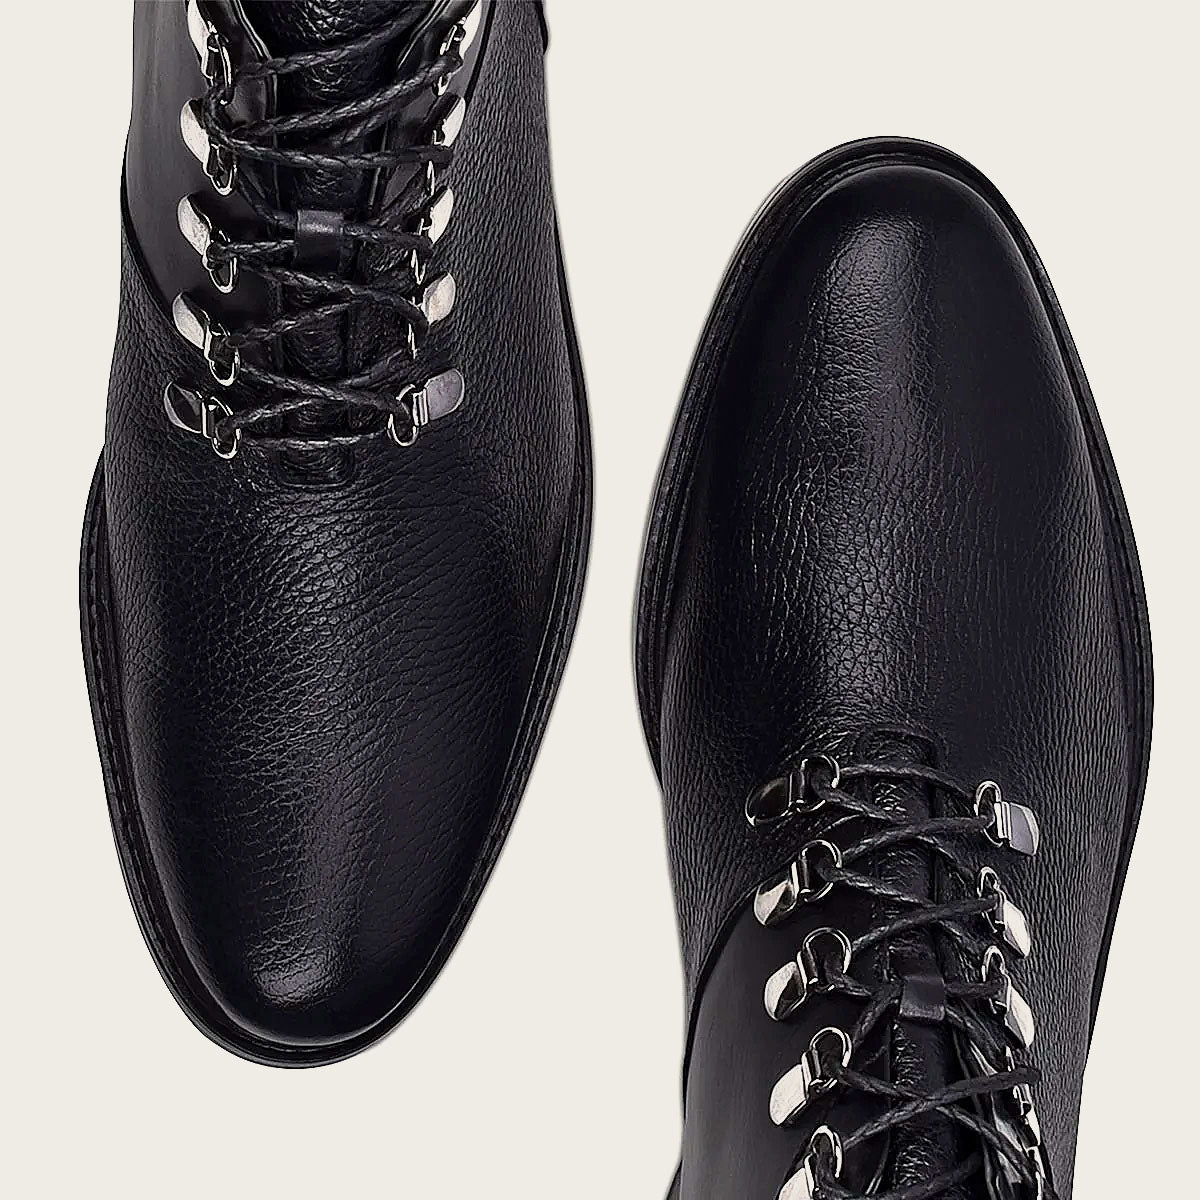 Black deer leather urban bootie - a sophisticated and versatile addition to any wardrobe